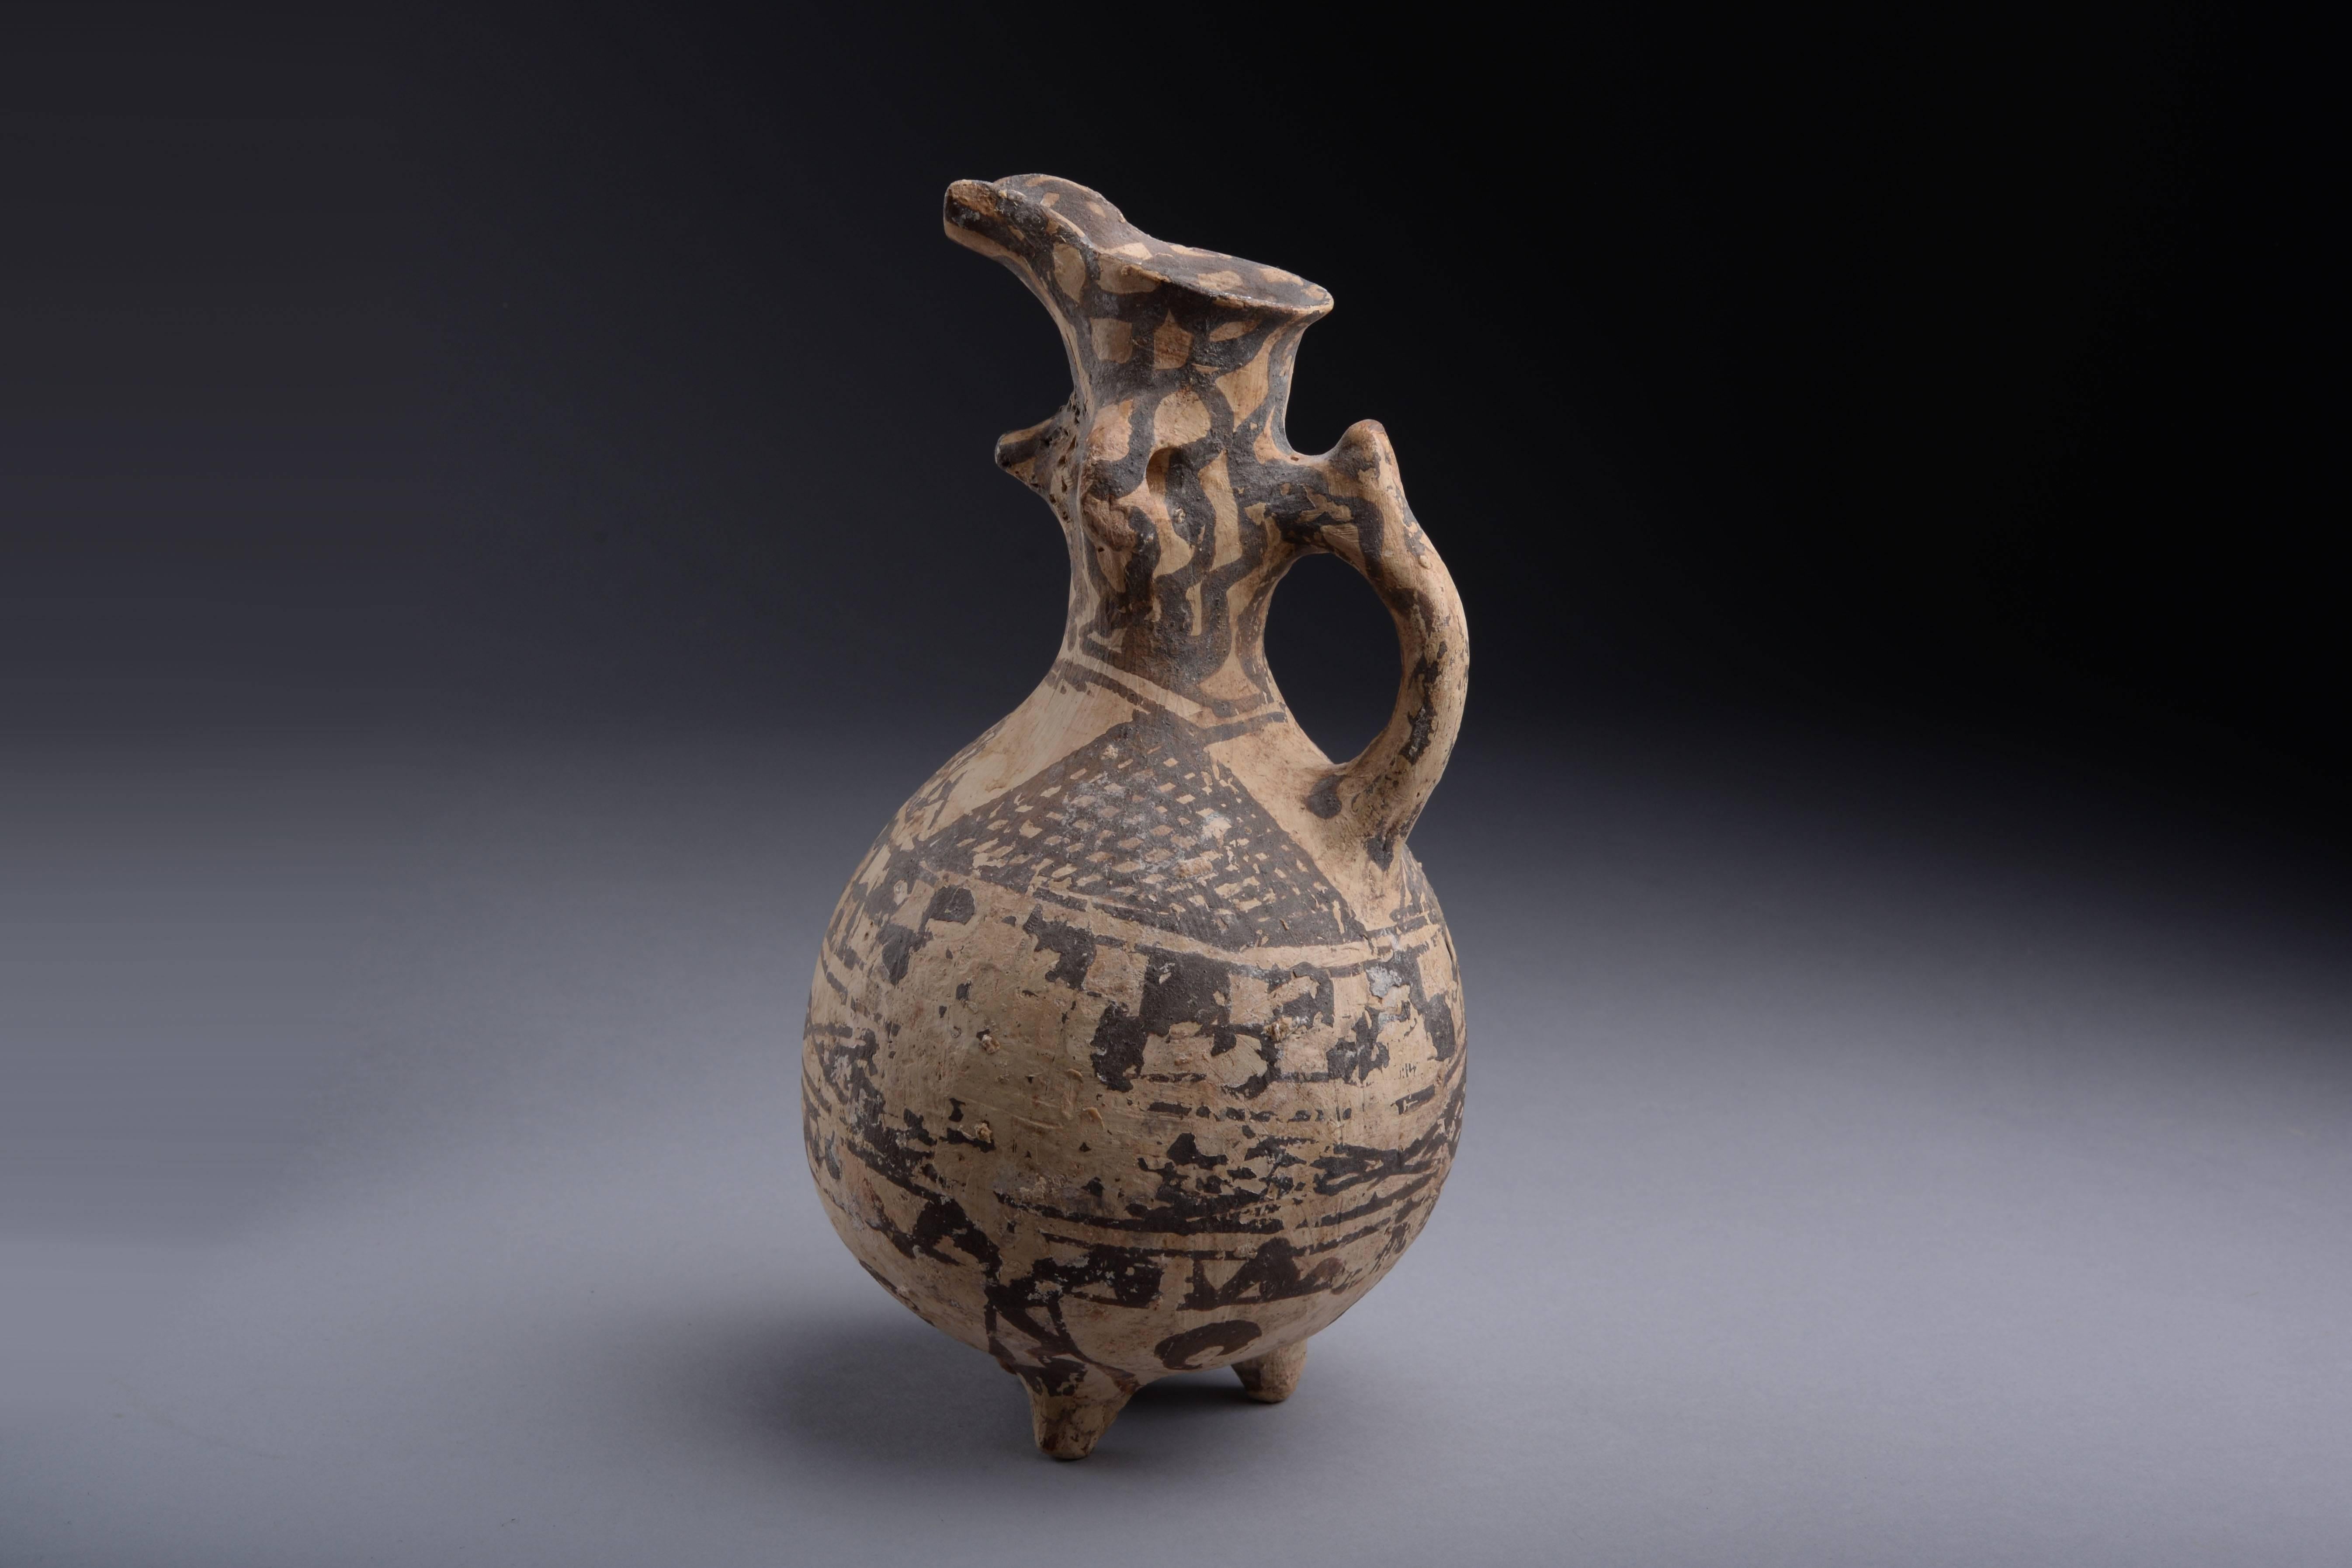 An exceptional Middle Bronze Age Cypriot ceramic of clearly anthropomorphic form.

The ceramic has an ovoid body, which stands on three stubby legs, a short cylindrical neck, funnel spout and loop handle at the back. A protuberance represents the